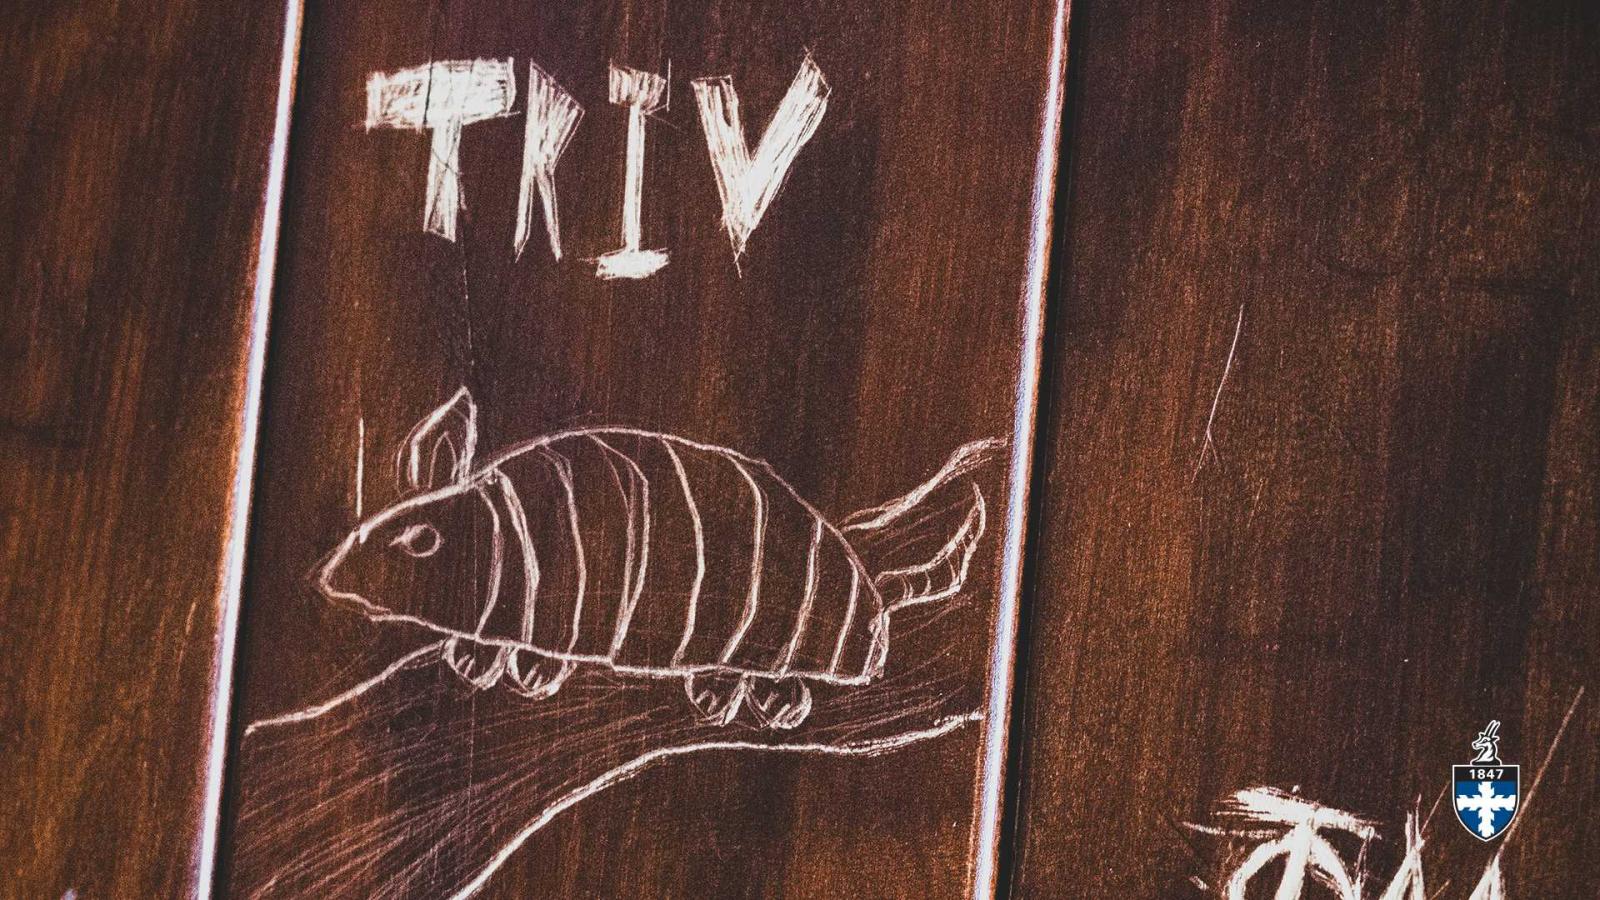 Drawing of armadillo with text "TKIV" over it carved into wood panel.